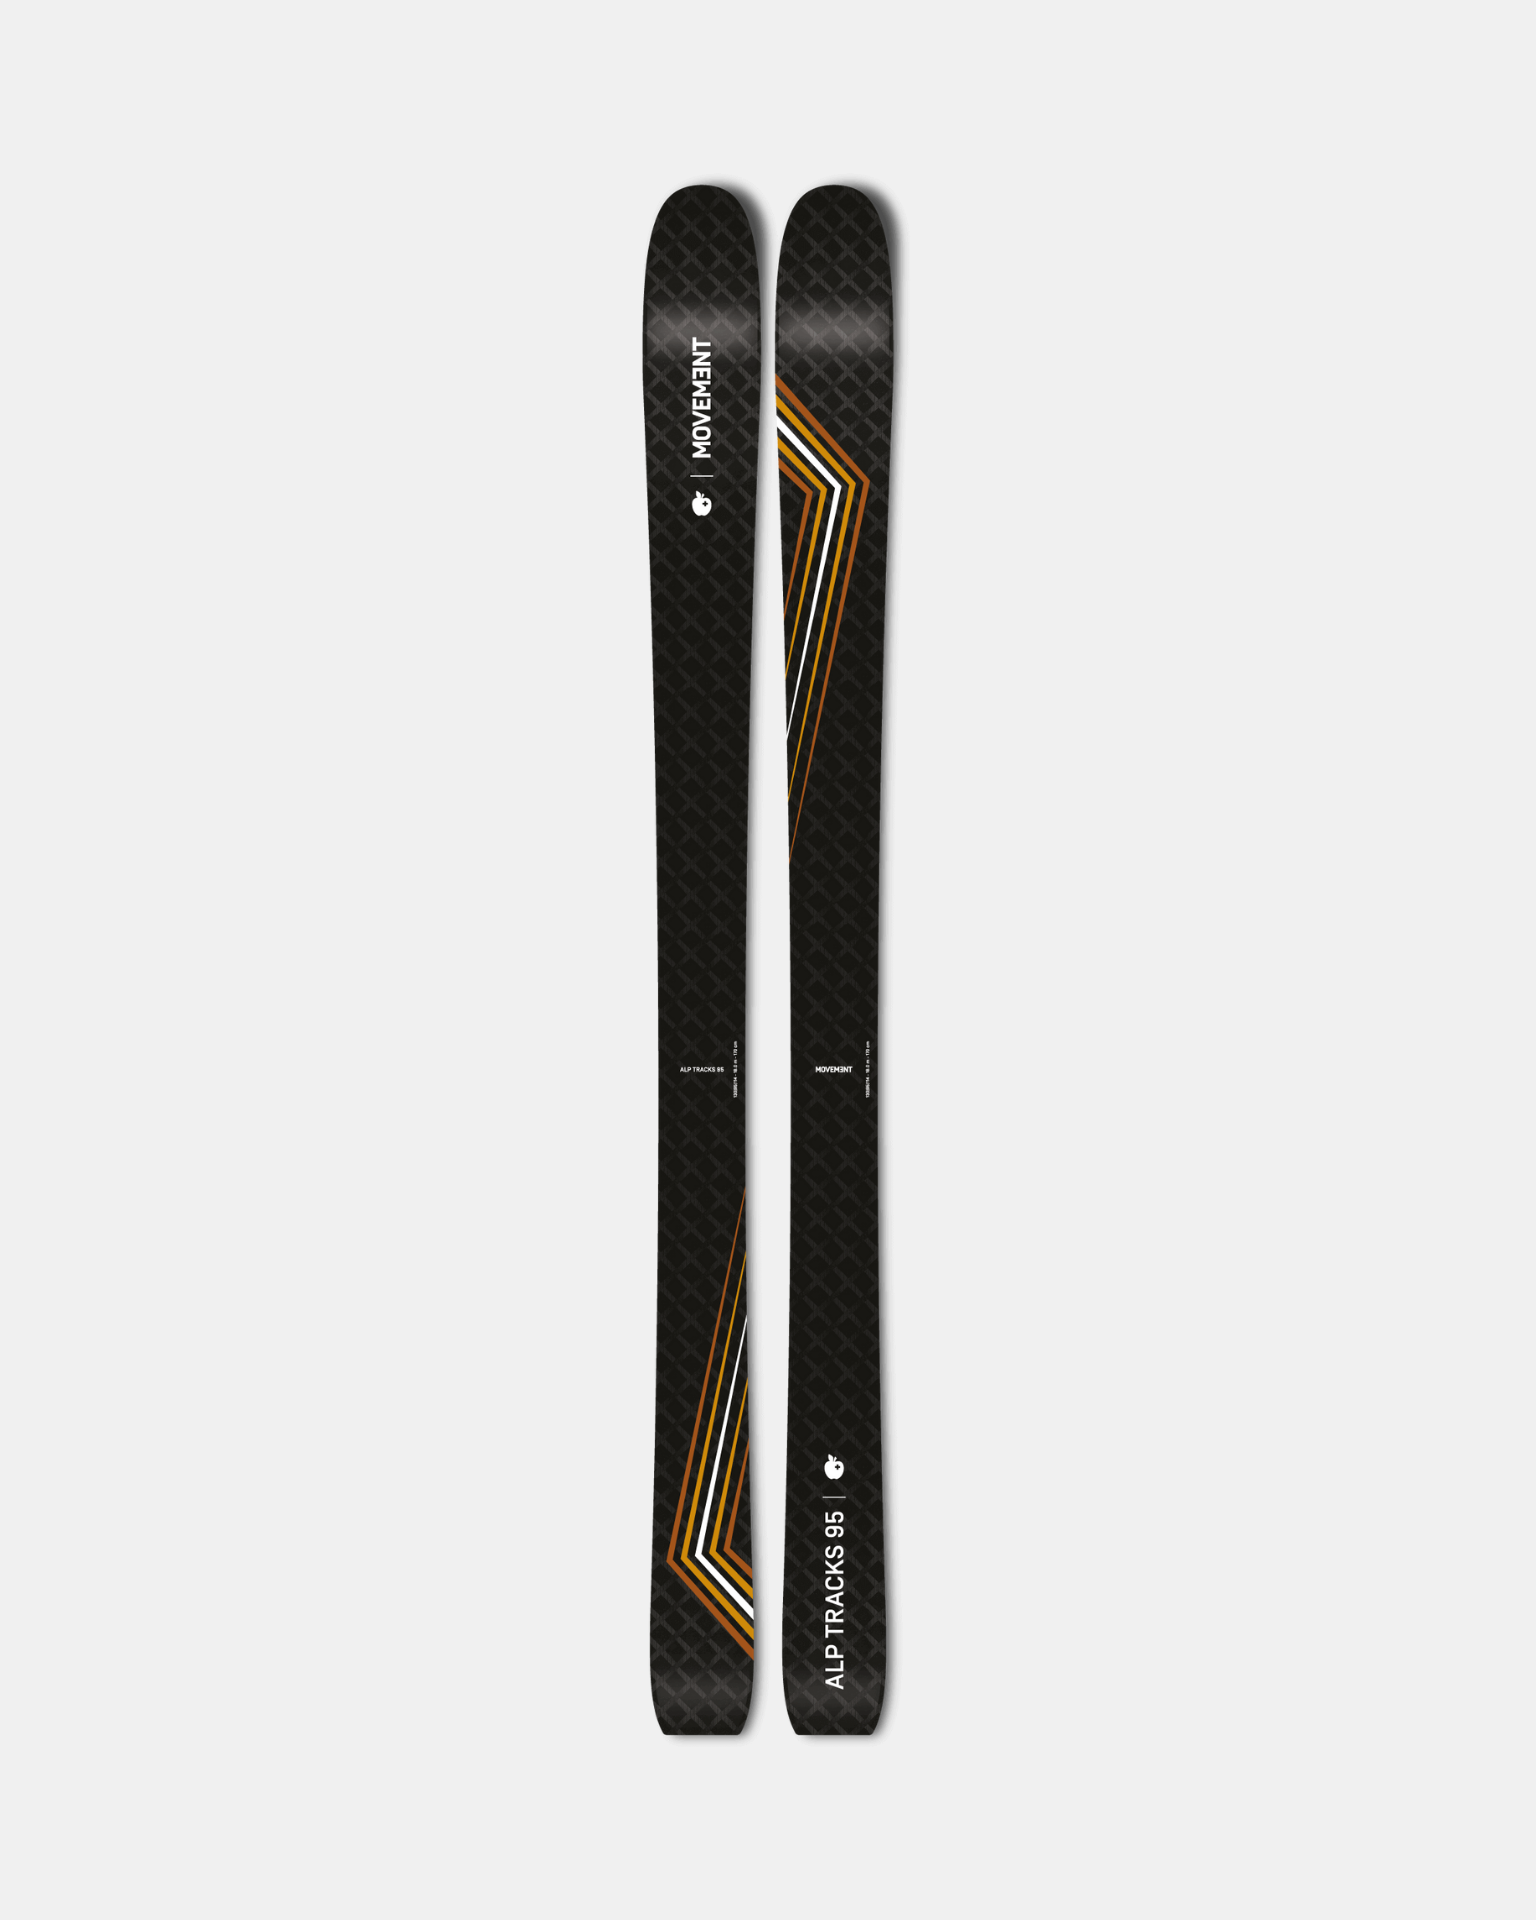 Experience Movement's renowned touring excellence through Alp Tracks 95 skis.